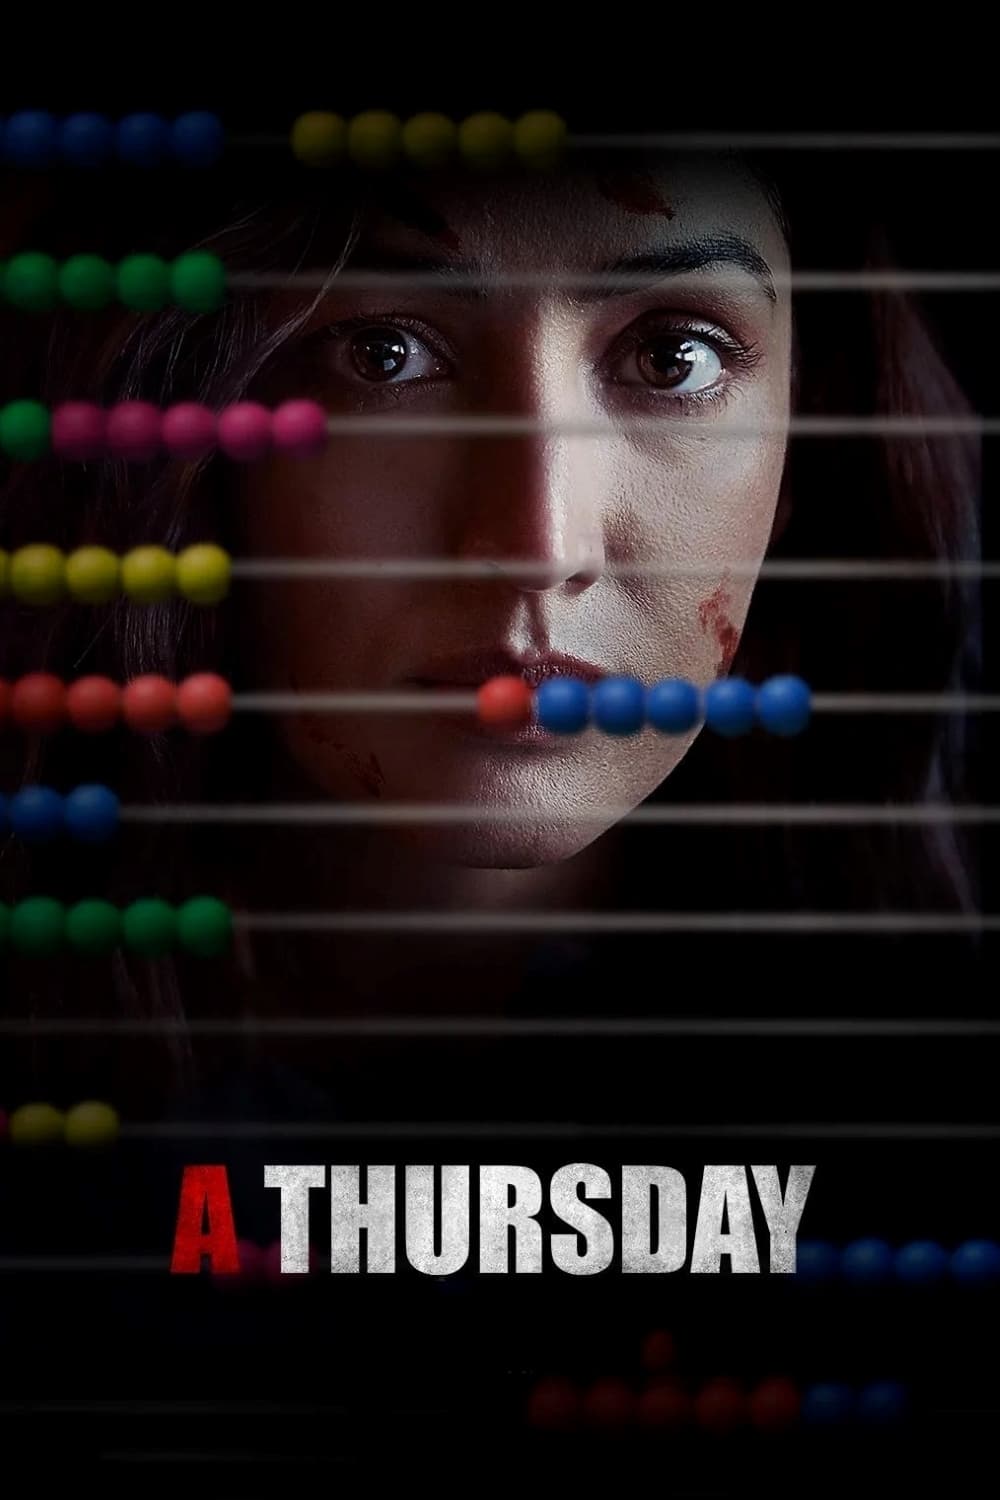 Poster for the movie "A Thursday"